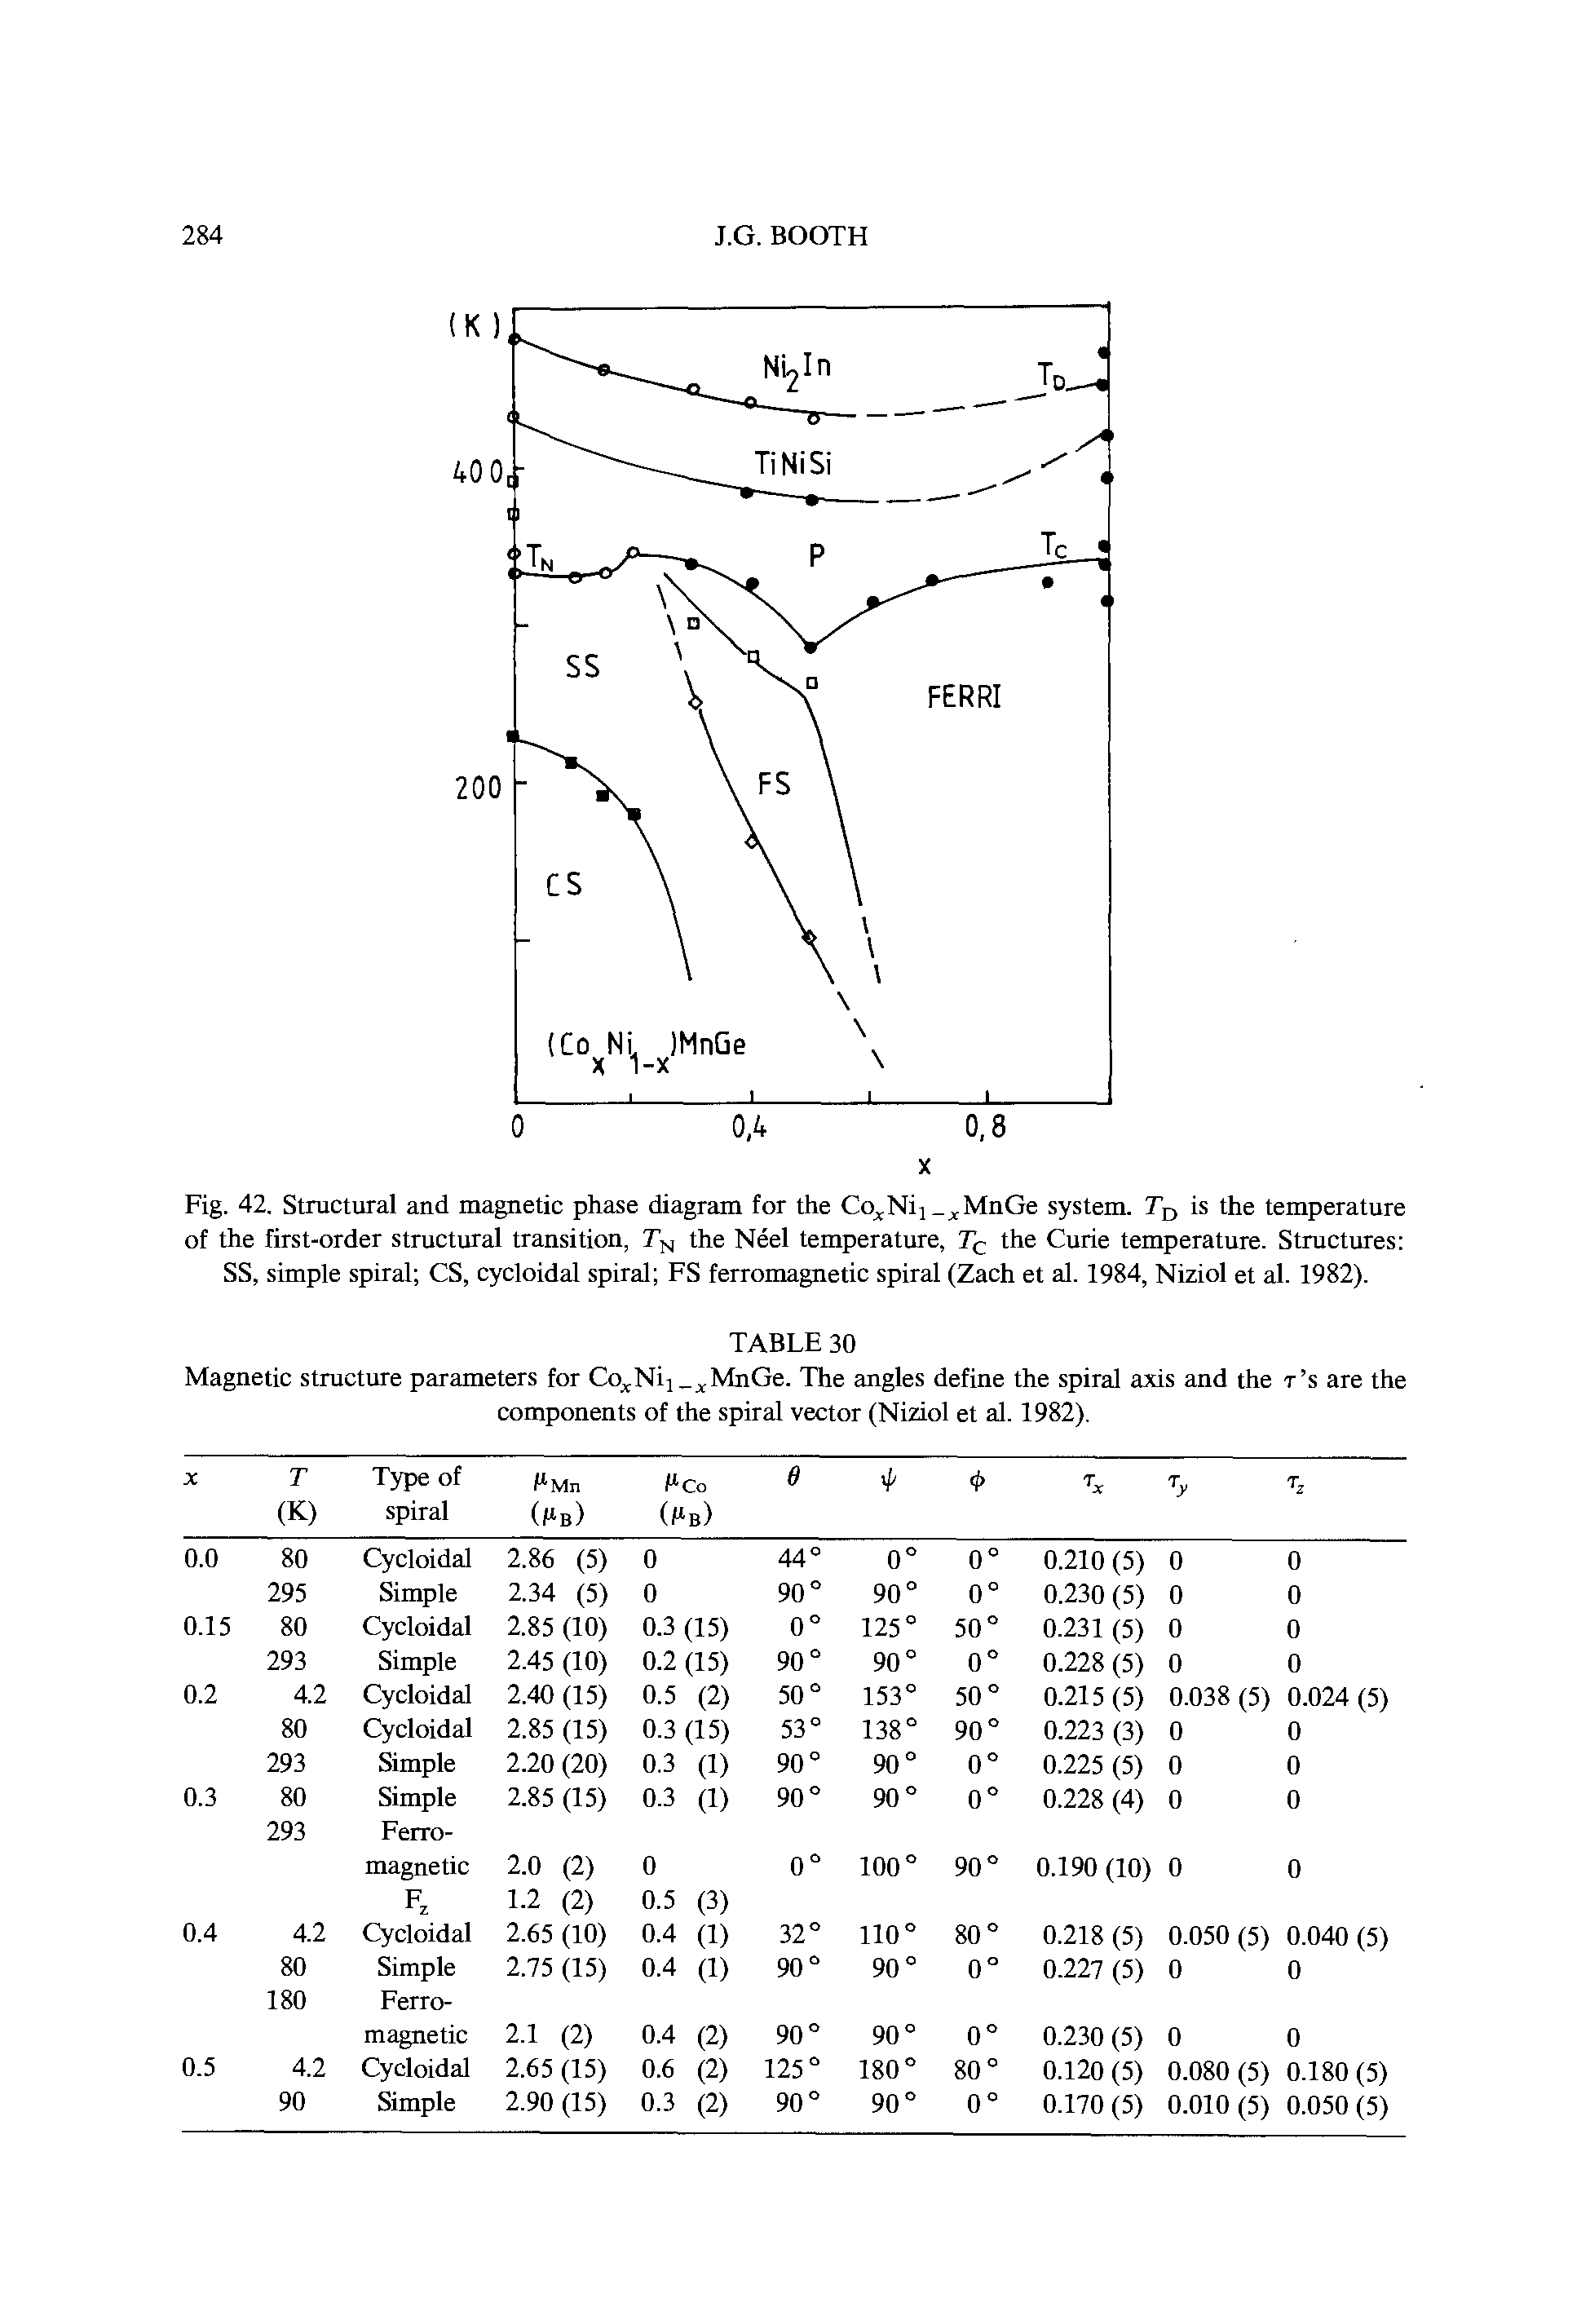 Fig. 42. Structural and magnetic phase diagram tor the Co Ni MnGe system. Tu is the temperature of the first-order structural transition, the Neel temperature, Tc the Curie temperature. Structures SS, simple spiral CS, cycloidal spiral FS ferromagnetic spiral (Zach et al. 1984, Niziol et al. 1982).